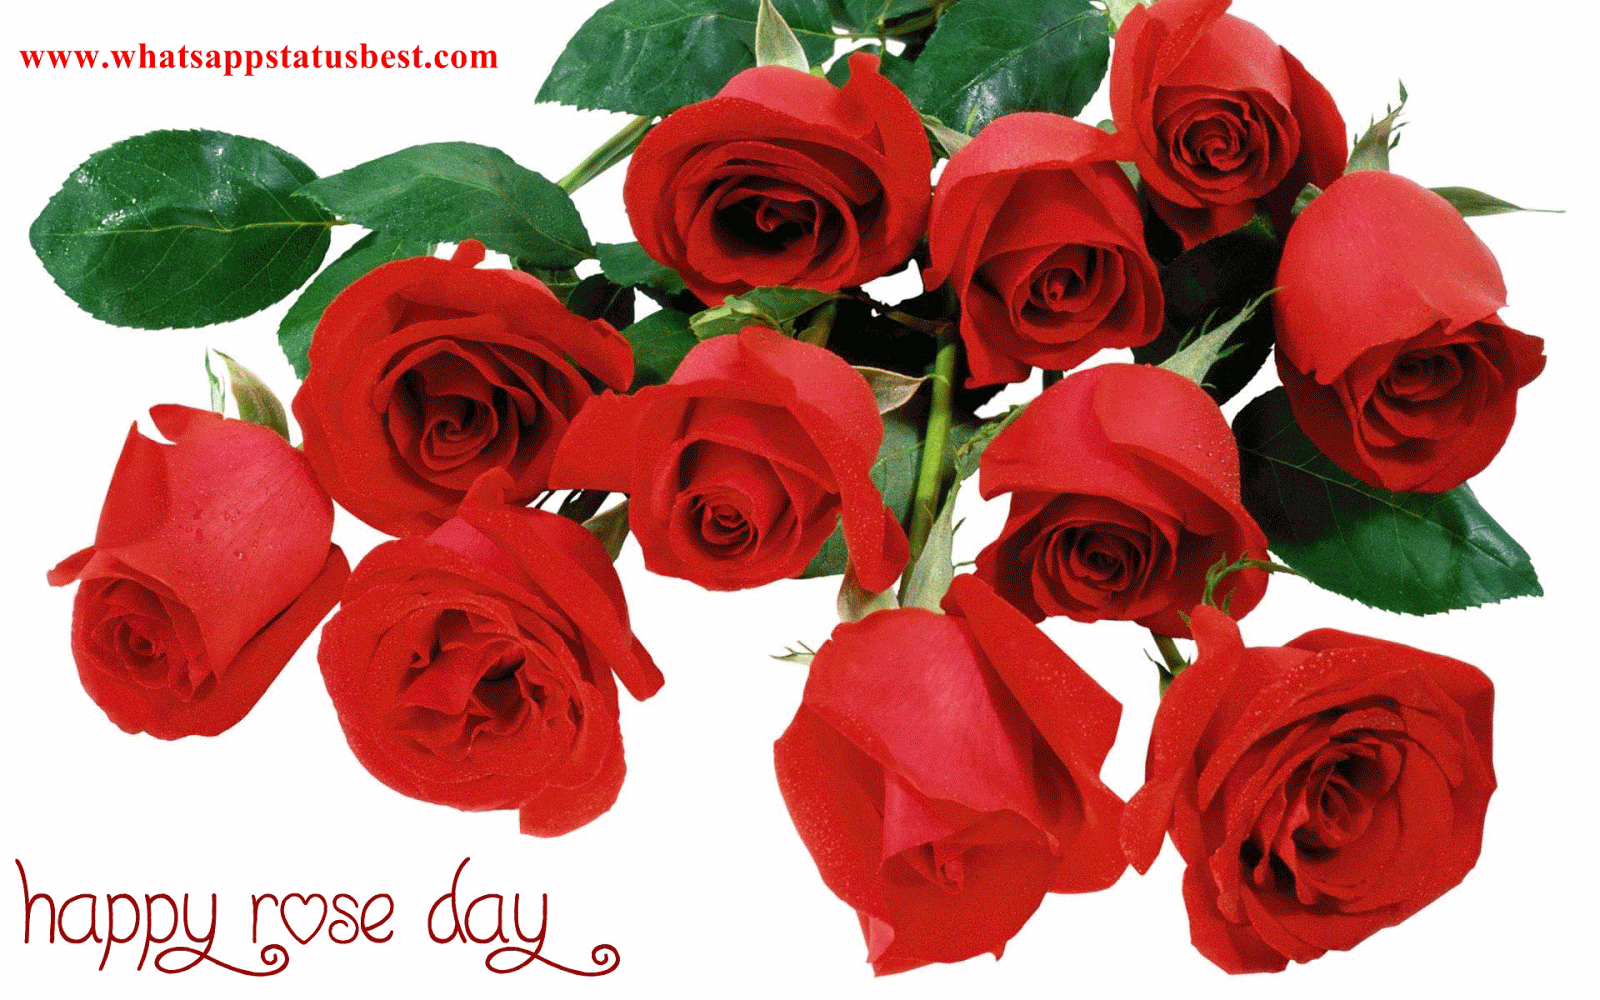 Happy Rose Day Facebook Message: Happy Rose Day greetings